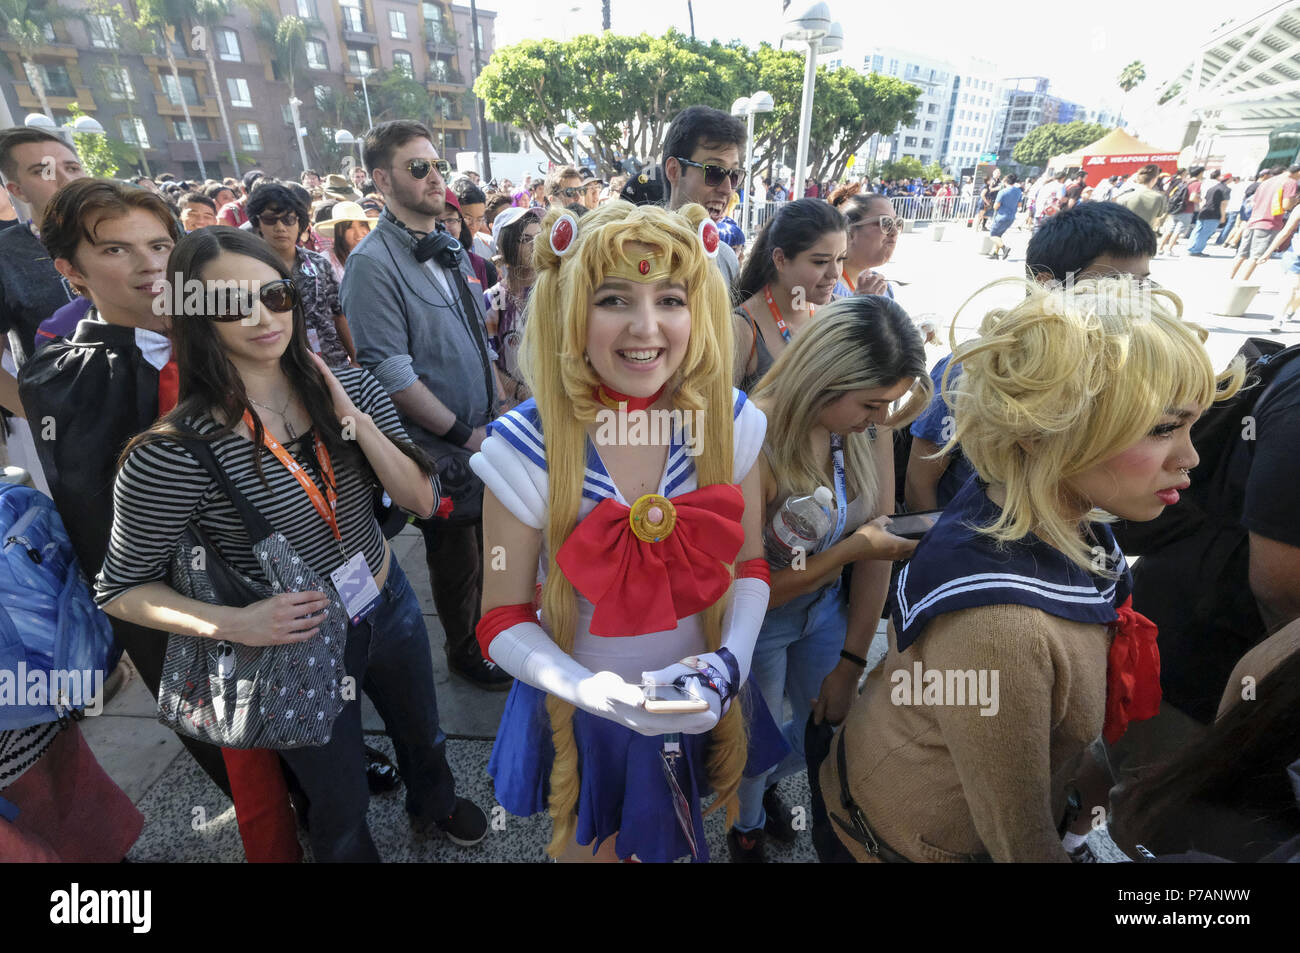 NYC Anime Convention Was Not a Superspreader Event CDC Finds  The  New York Times